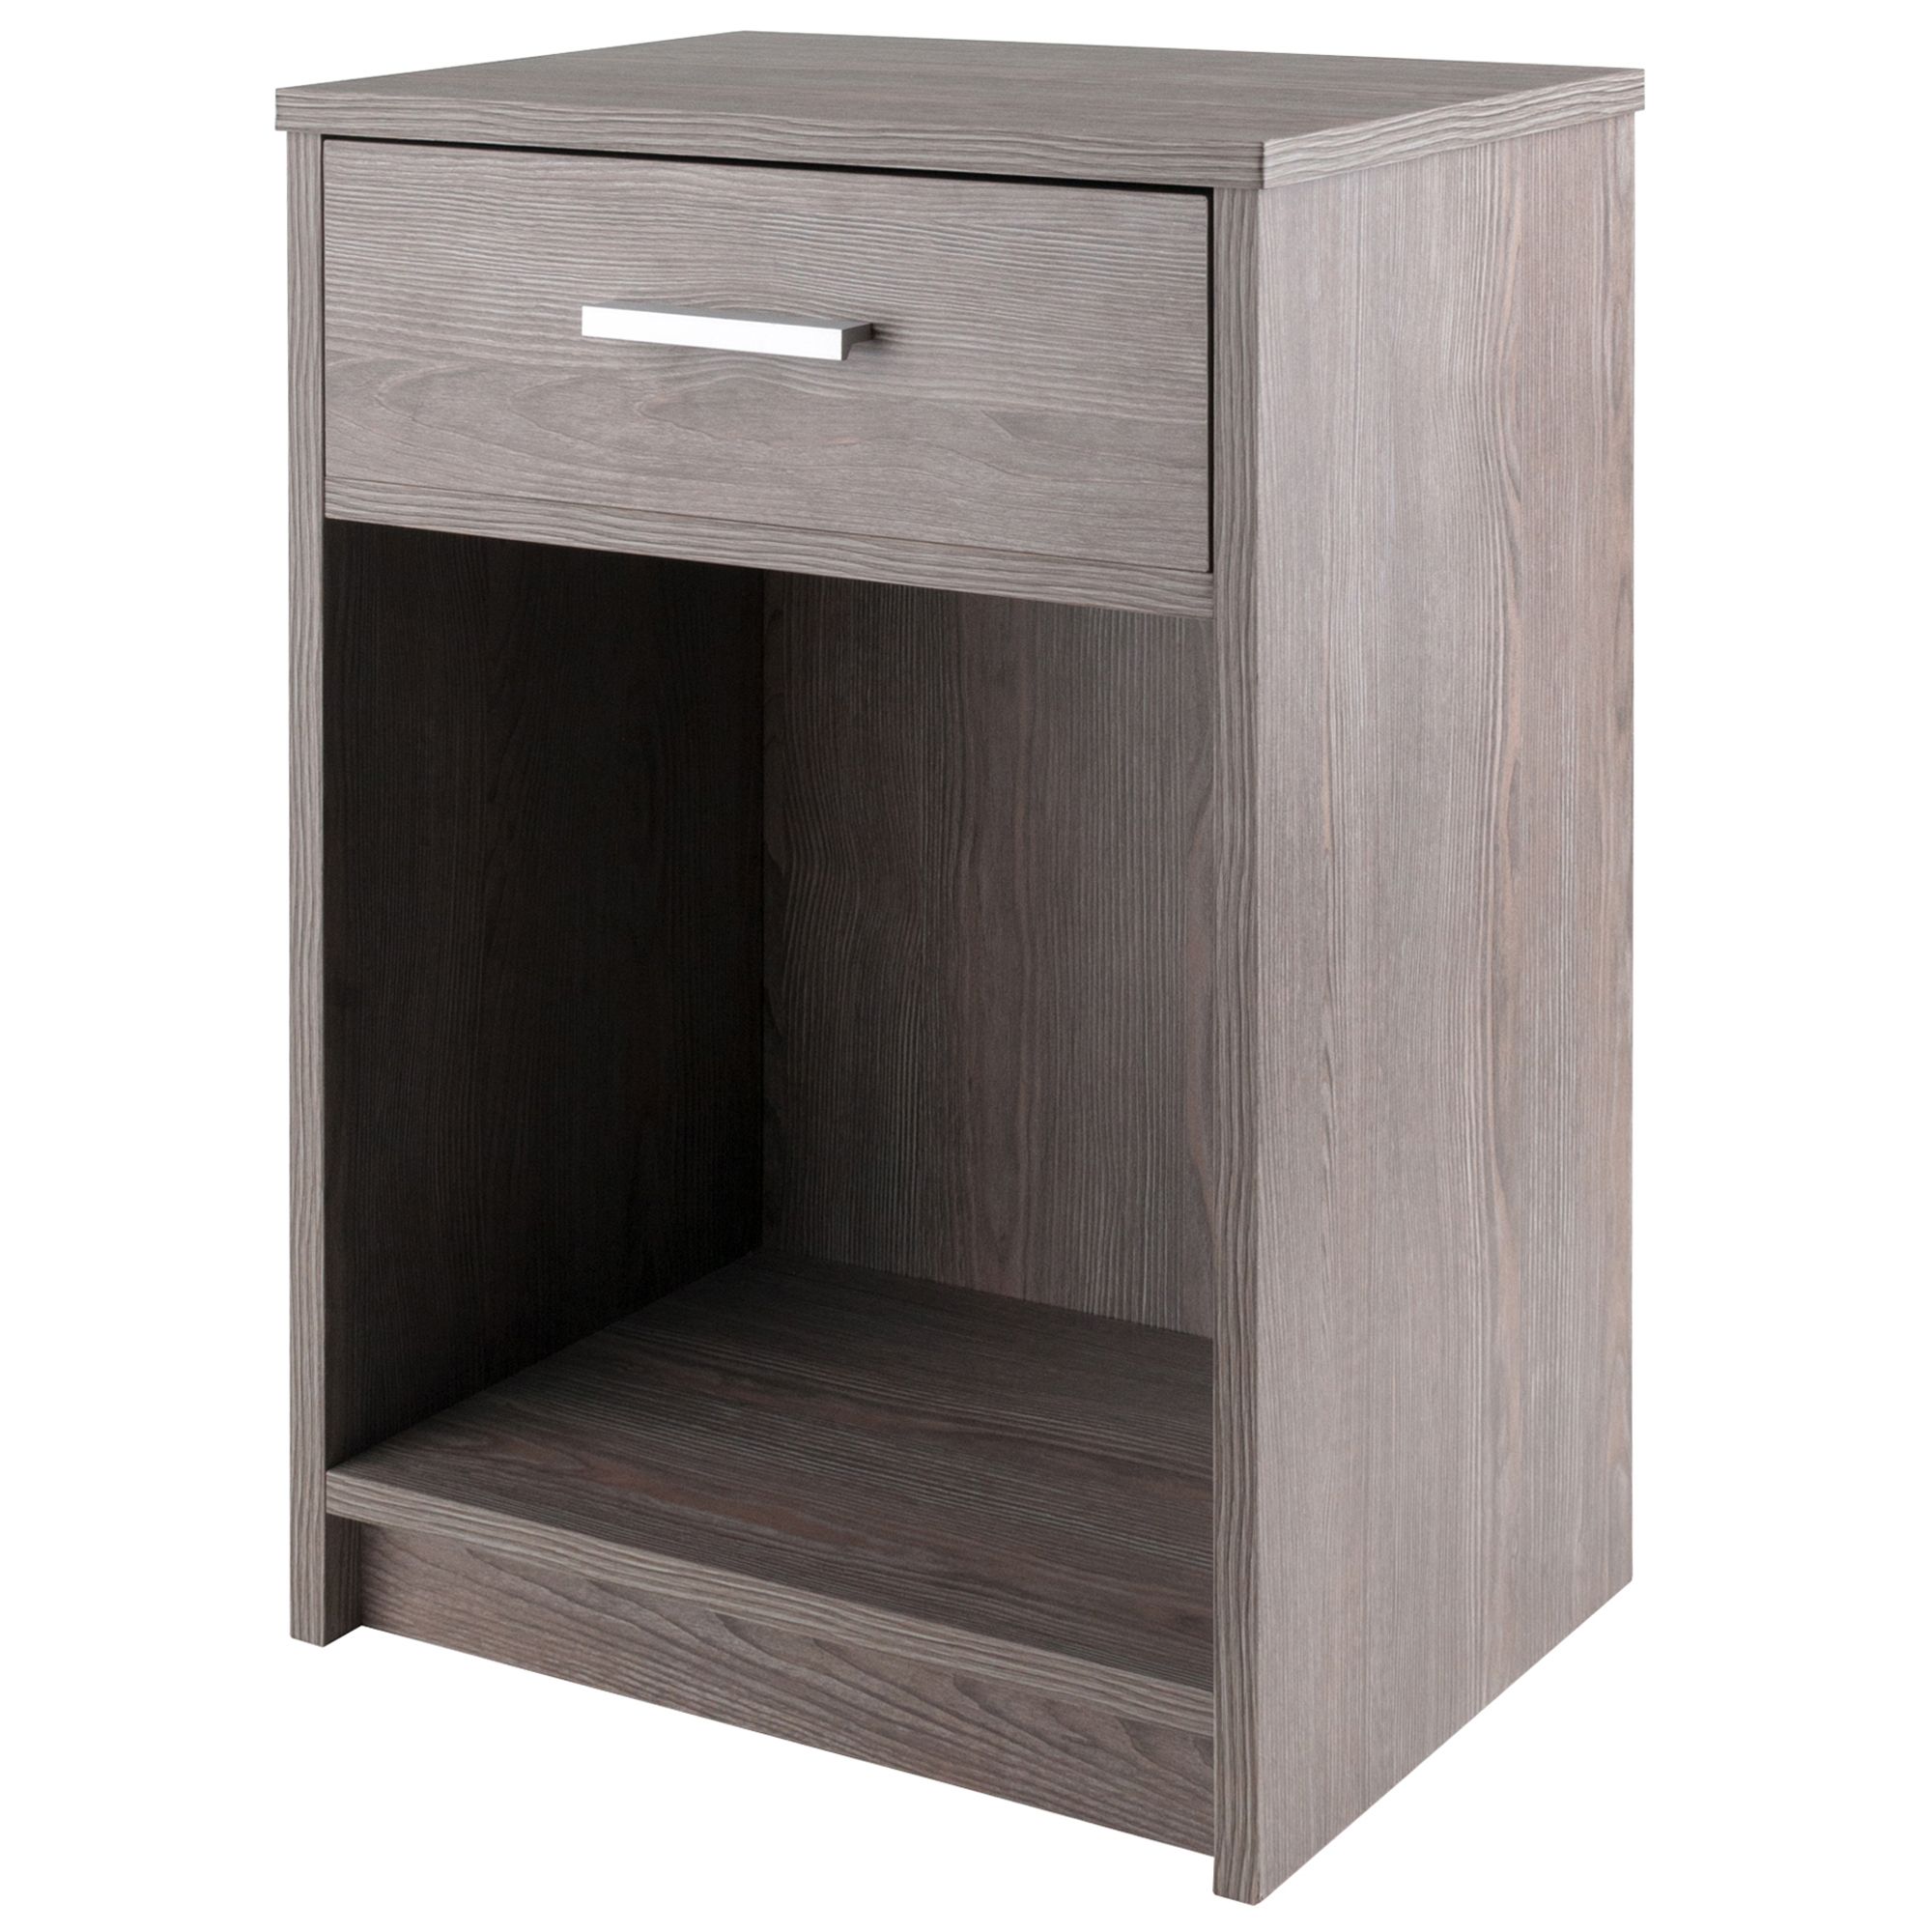 Smoke Gray Wood 1 Drawer Desks With Regard To Most Recent Winsome Wood Rennick 1 Drawer Nightstand, Ash Gray Finish – Walmart (View 5 of 15)